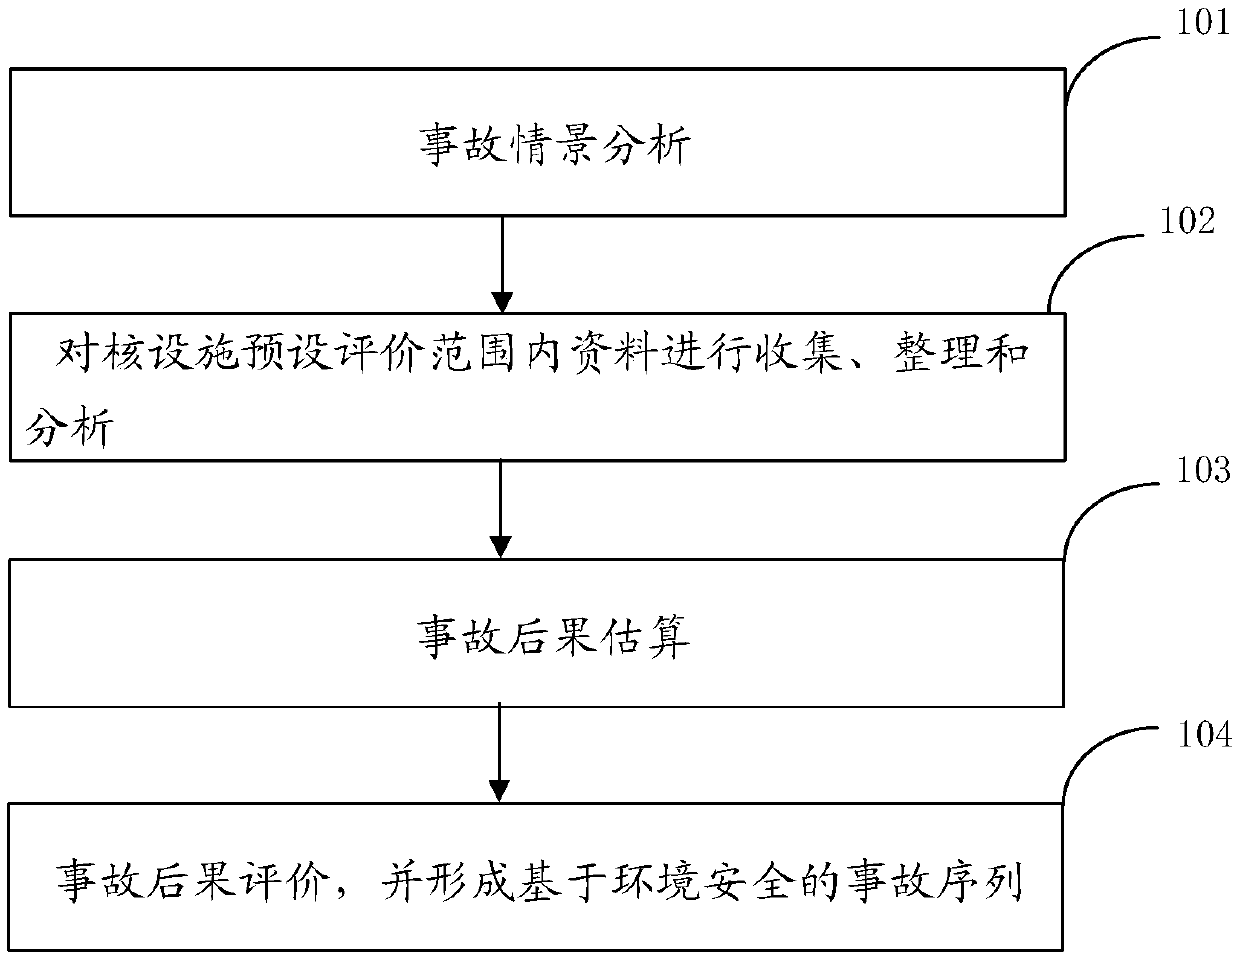 Accident sorting method based on environmental safety accident responses